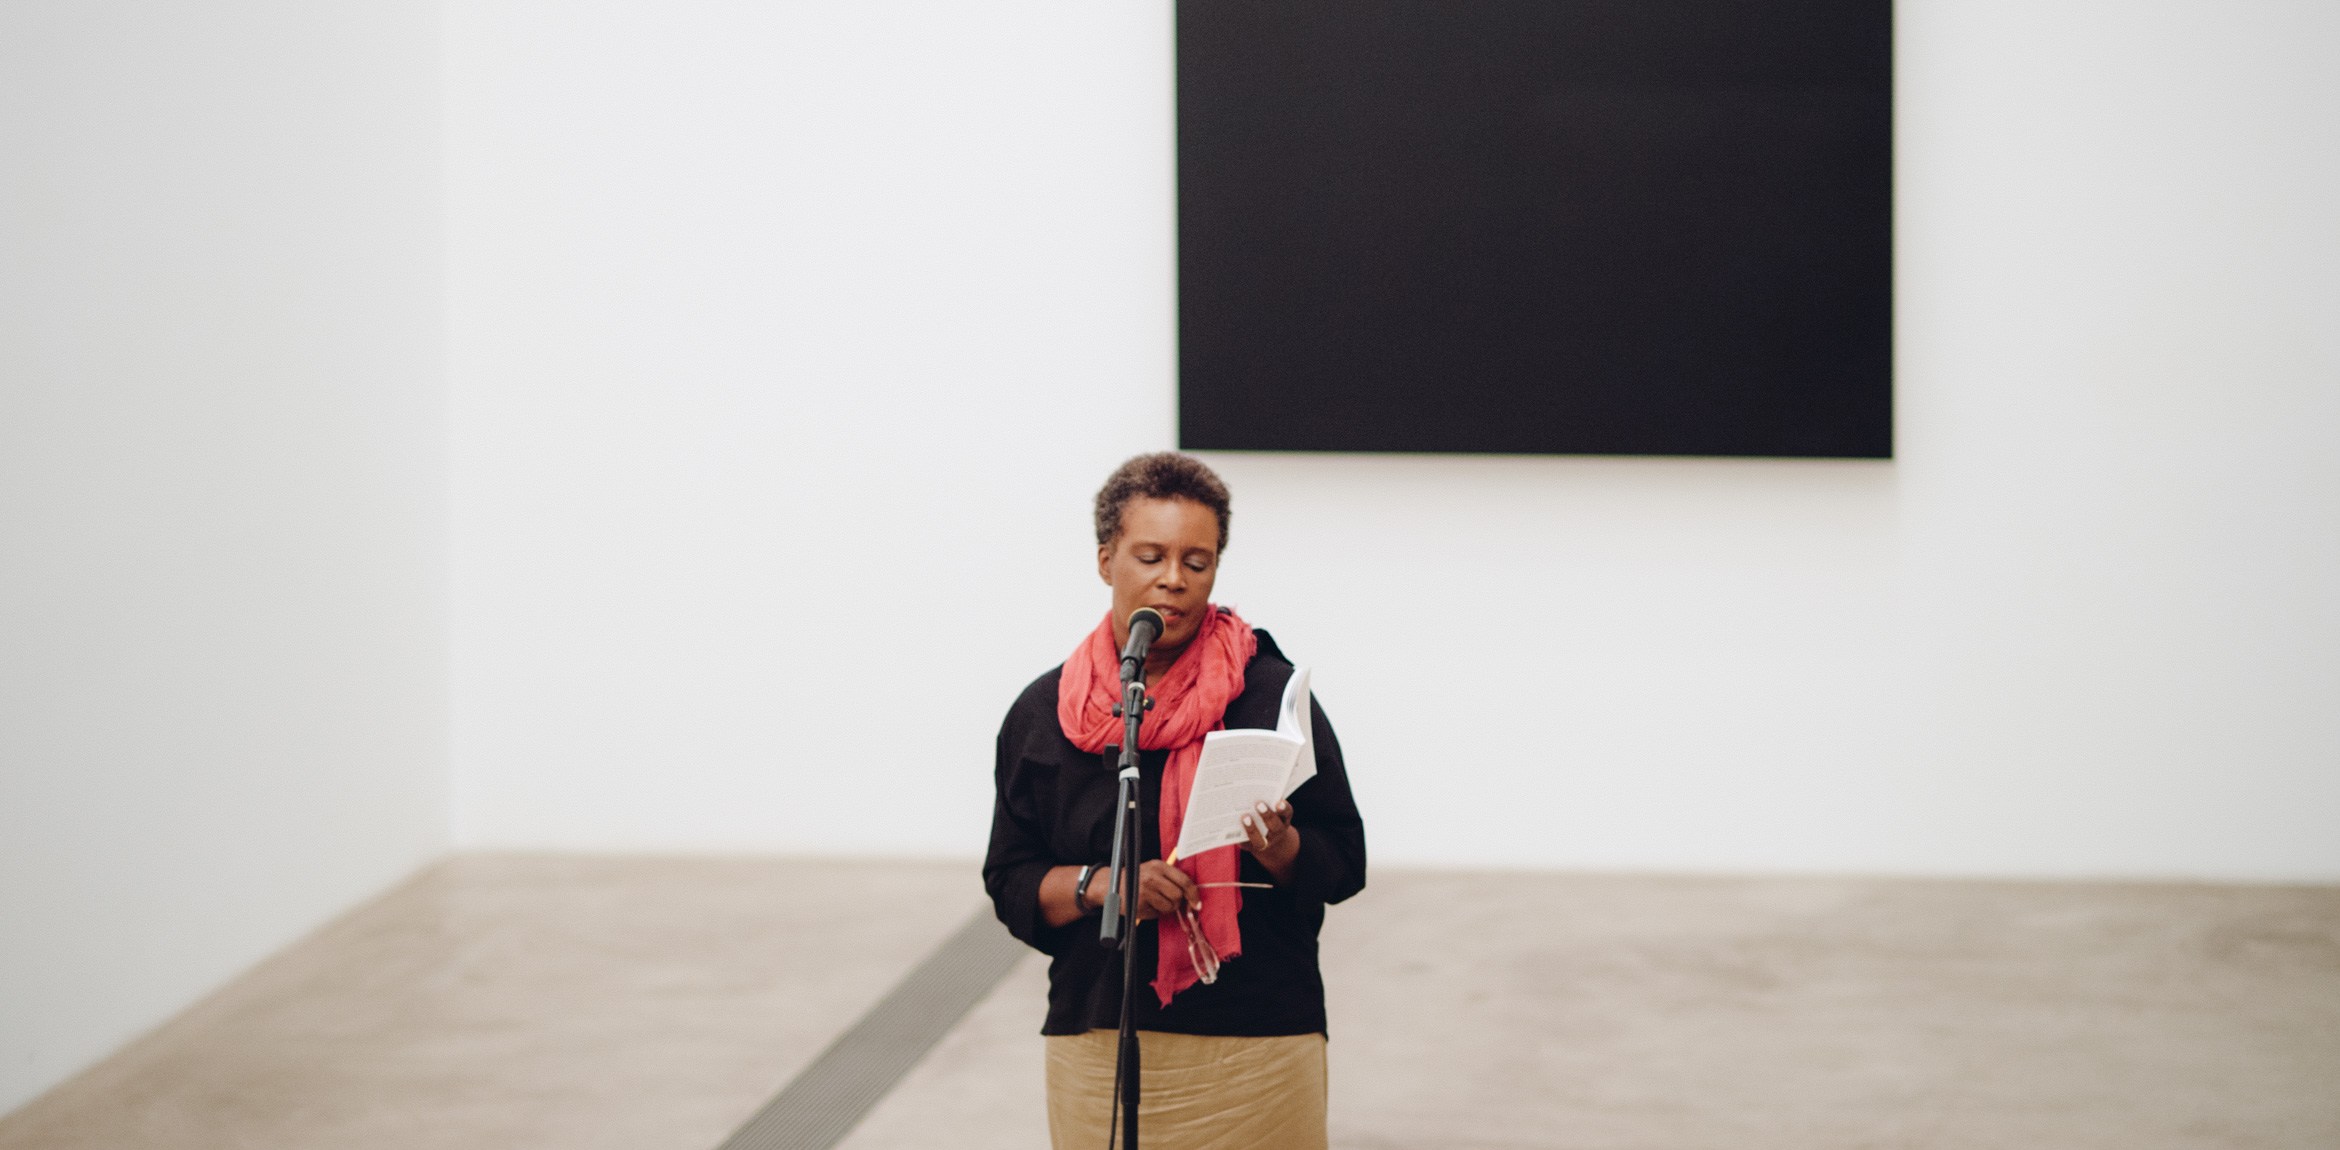 Claudia Rankine reads into a microphone in front of "Blue Black" by Ellsworth Kelly.